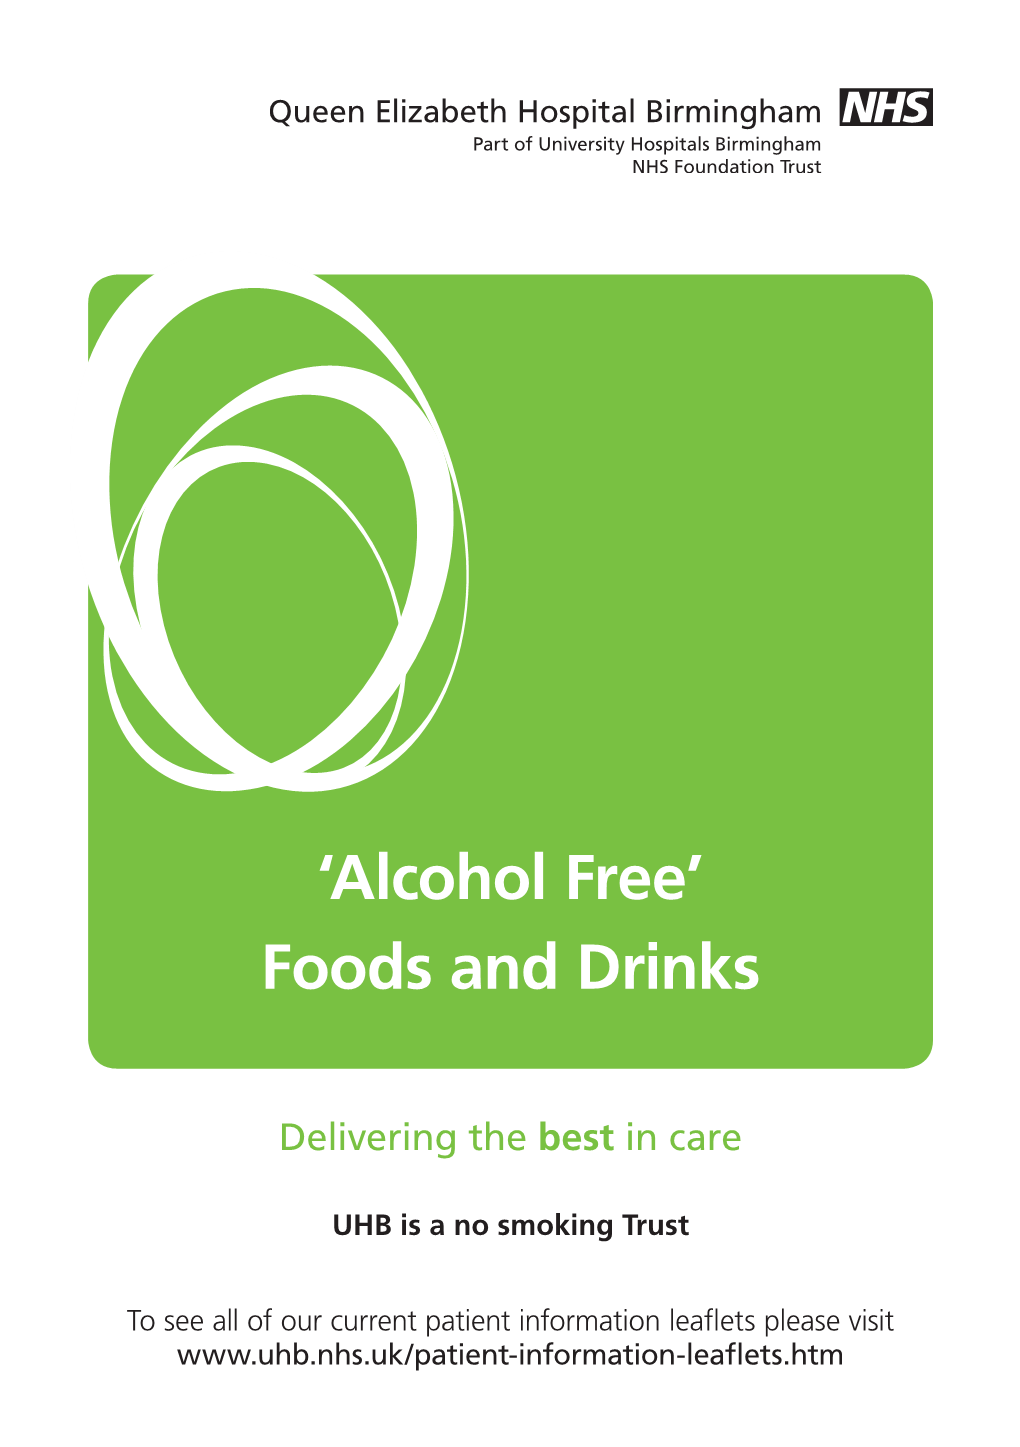 'Alcohol Free' Foods and Drinks